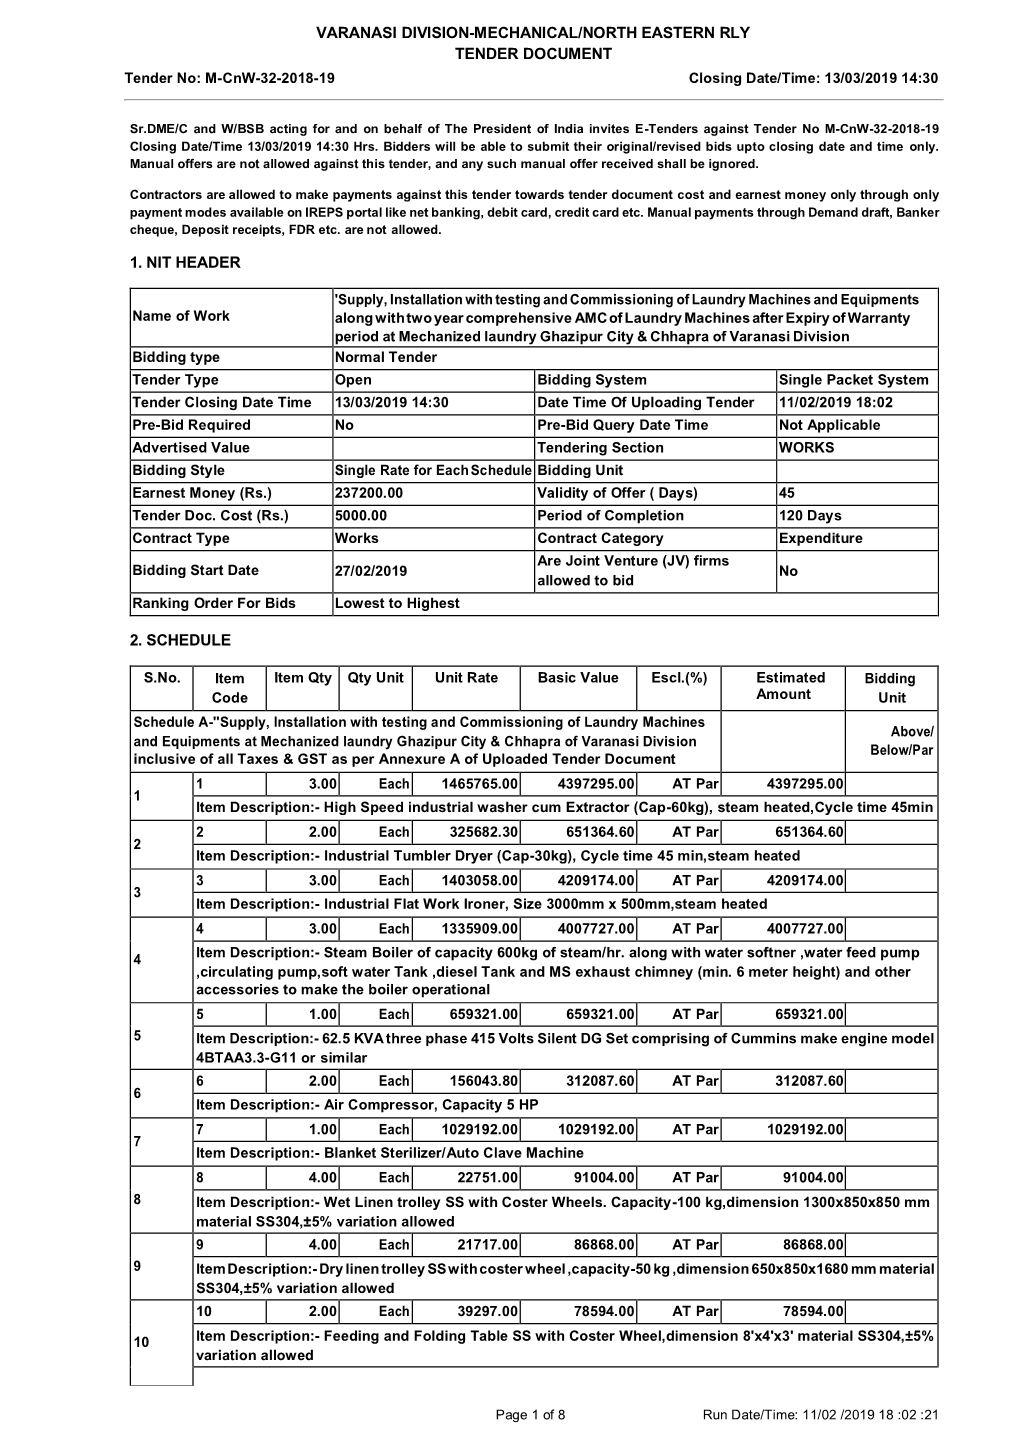 VARANASI DIVISION-MECHANICAL/NORTH EASTERN RLY TENDER DOCUMENT Tender No: M-Cnw-32-2018-19 Closing Date/Time: 13/03/2019 14:30